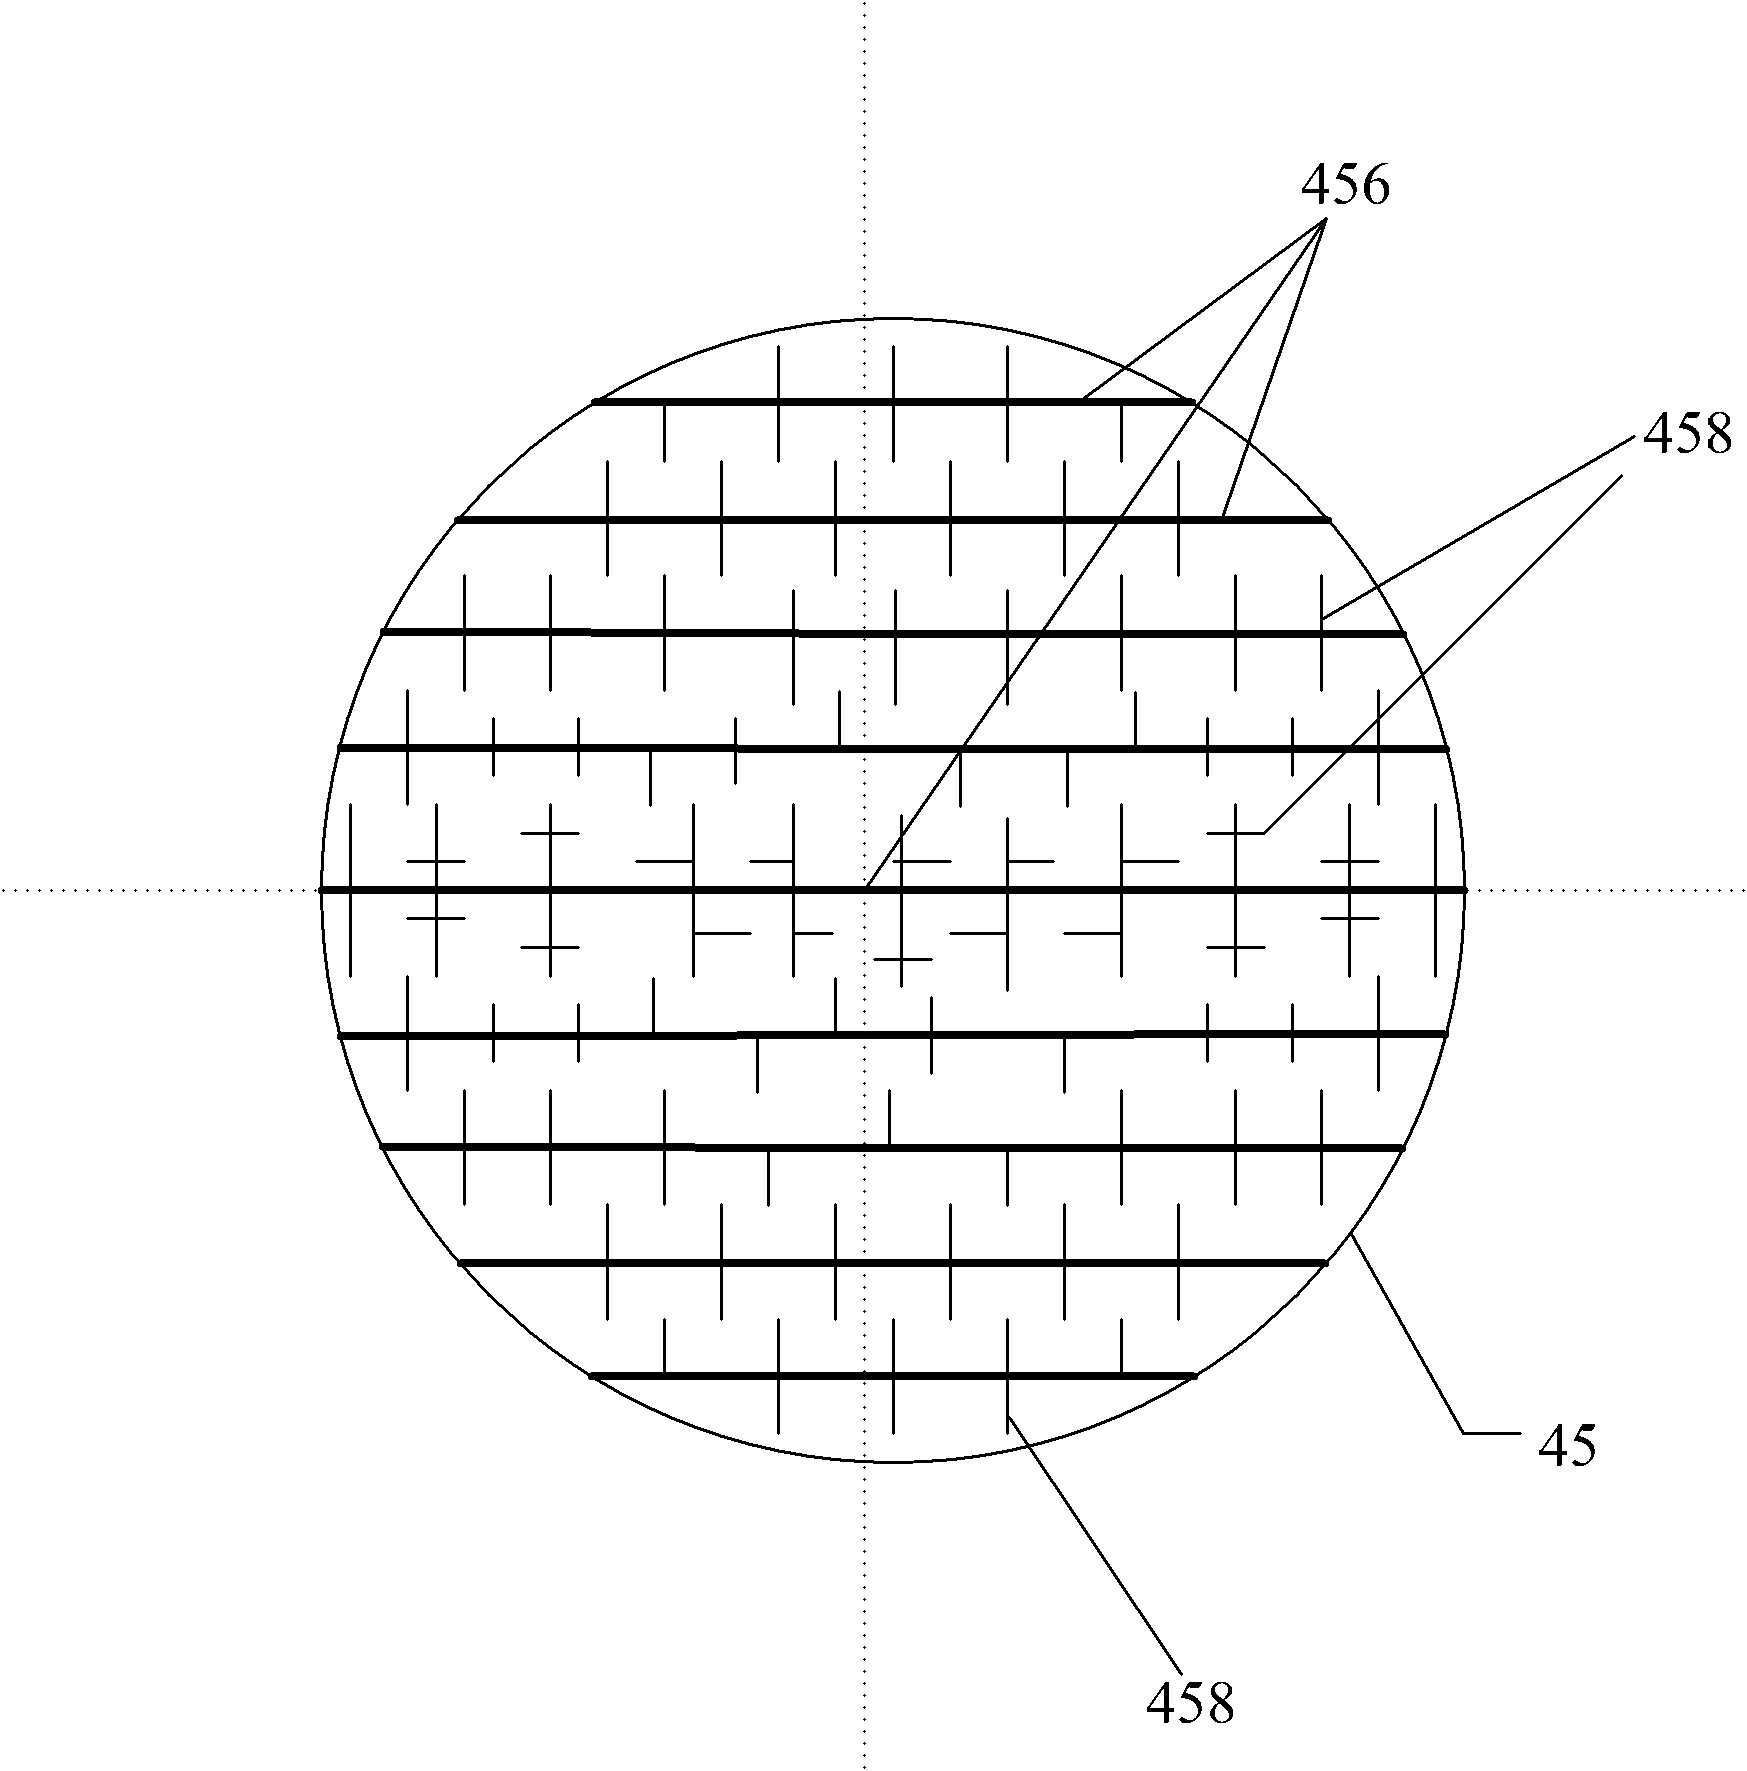 Gasification device for classified gasification of moving bed, method for gasifying coal and applications thereof